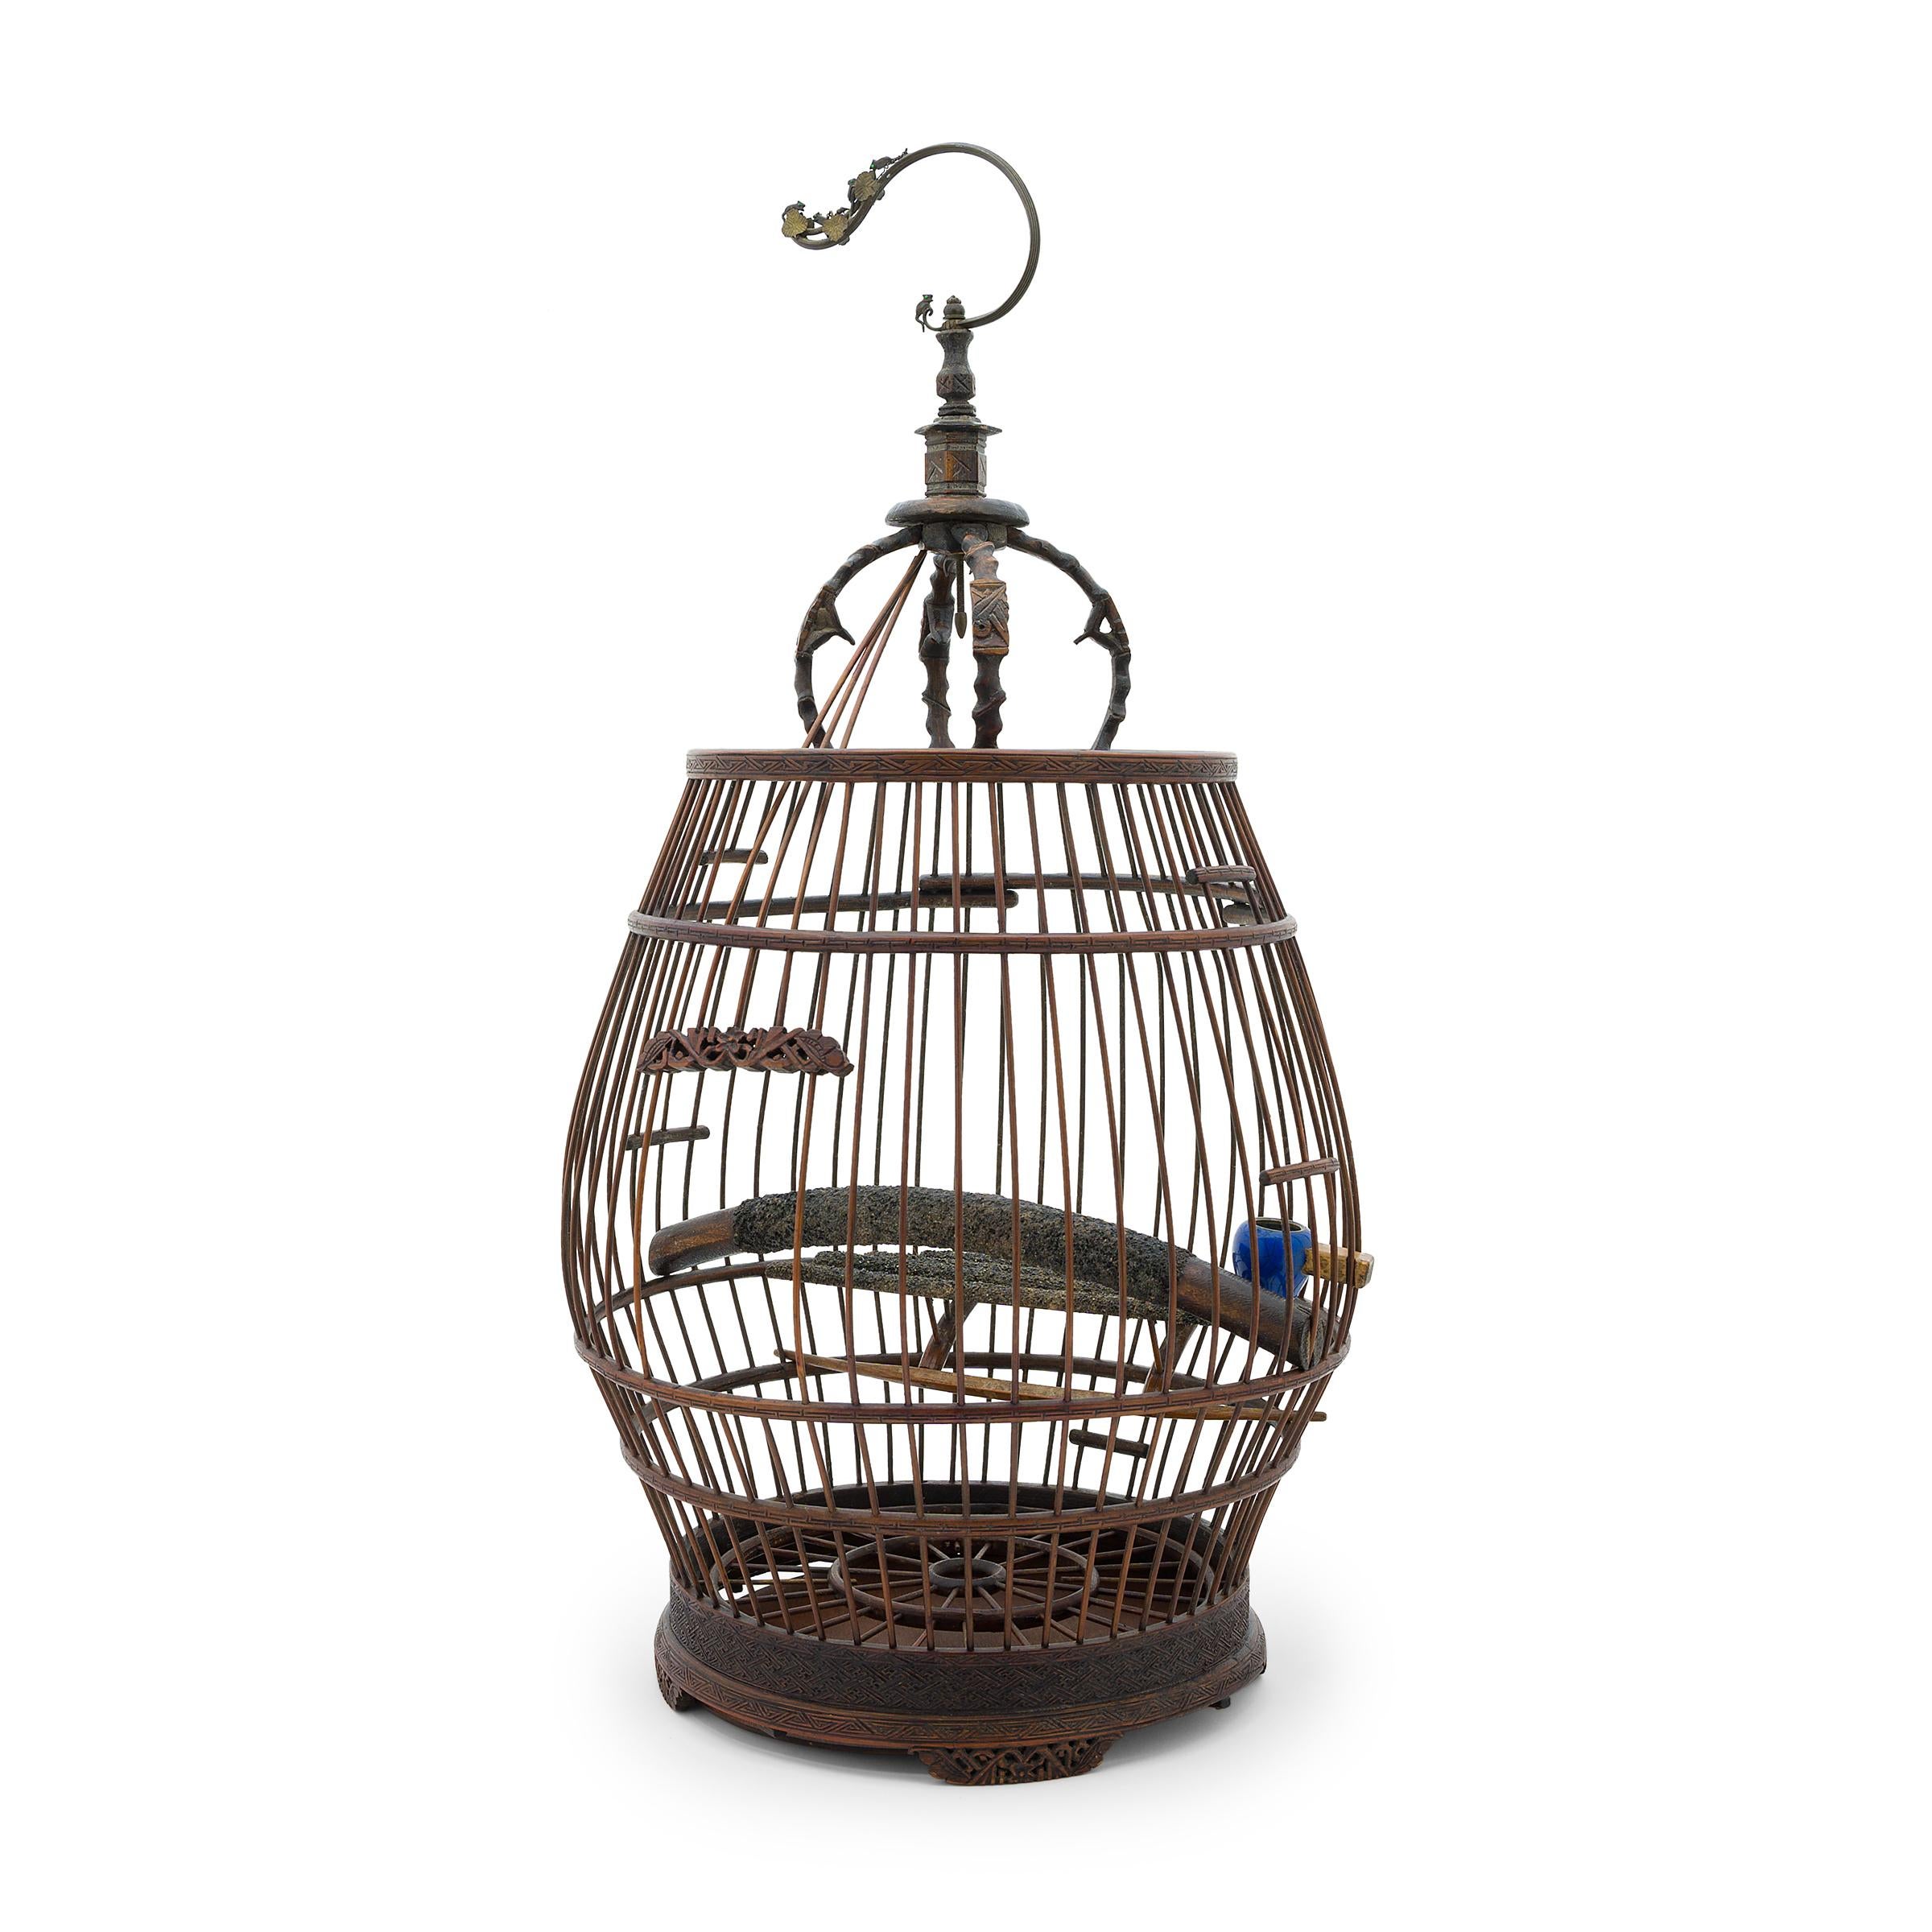 This delicate wooden birdcage was once home to the tiny pet bird of a Qing-dynasty aristocrat. Dated to the mid-19th century, this drum-shaped cage is carefully assembled of thin bamboo rods and bent bamboo strips carved with geometric scrollwork.